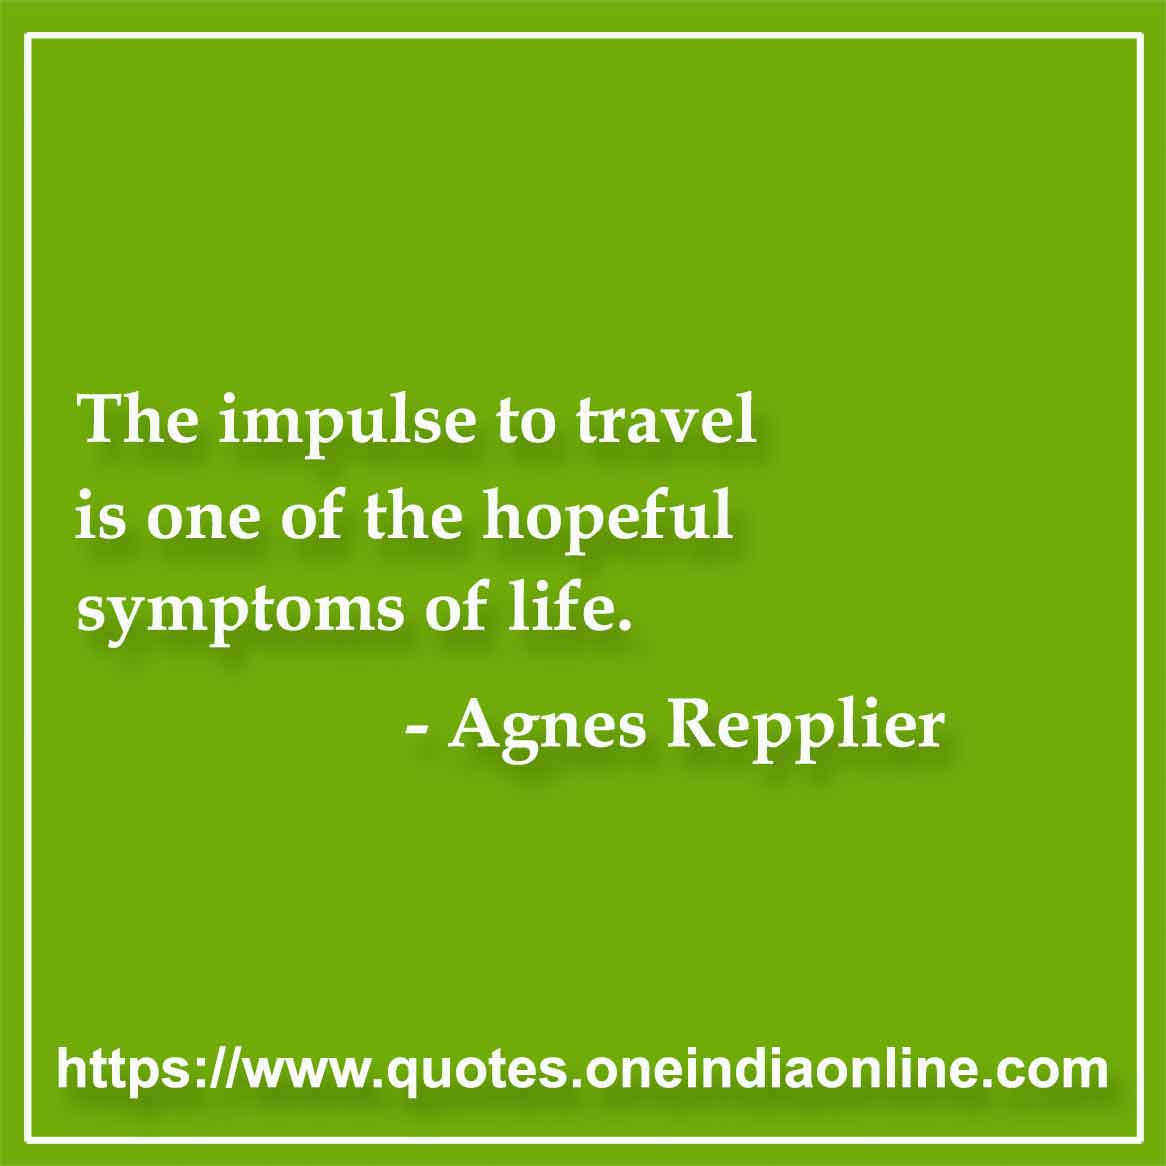 The impulse to travel is one of the hopeful symptoms of life.

-  by Agnes Repplier